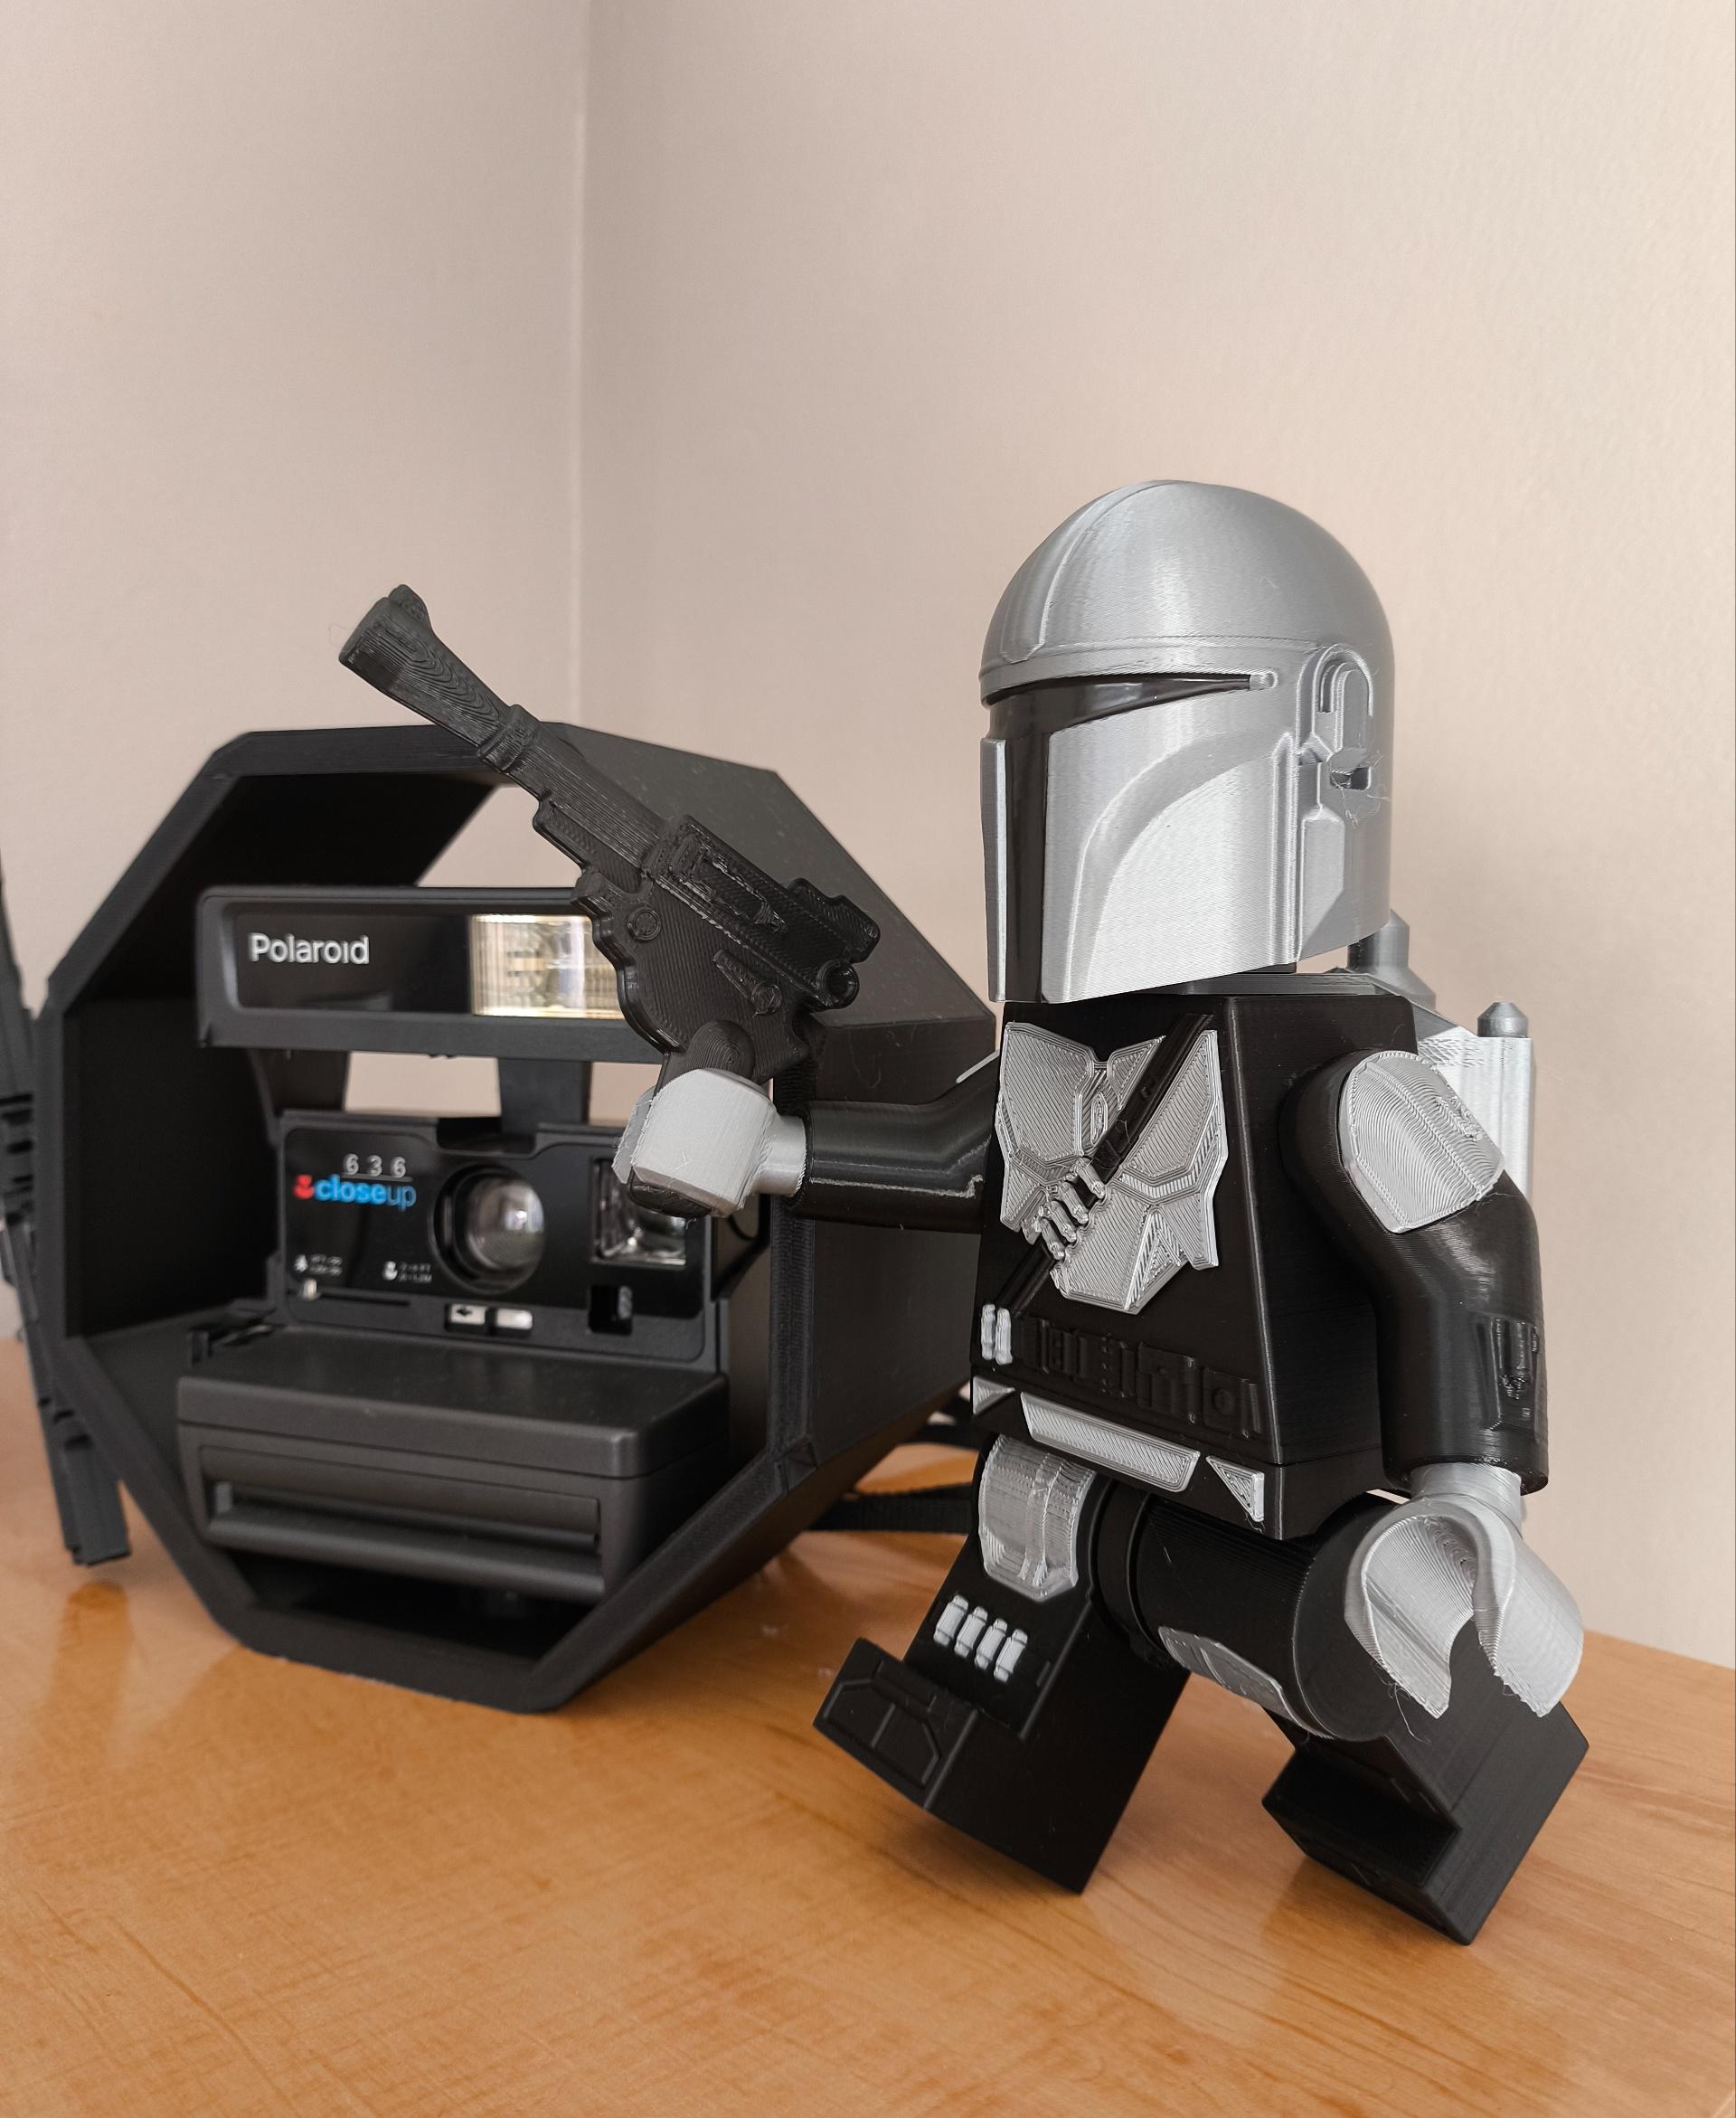 The Mandalorian (6:1 LEGO-inspired brick figure, NO MMU/AMS, NO supports, NO glue) - This is amazing!
Don't forget to make the XY compensation adjustment with the test piece. So that everything fits perfectly when calibrating your printer. I already had trouble with this in Stormtrooper.https://www.thingiverse.com/thing:342198 - 3d model